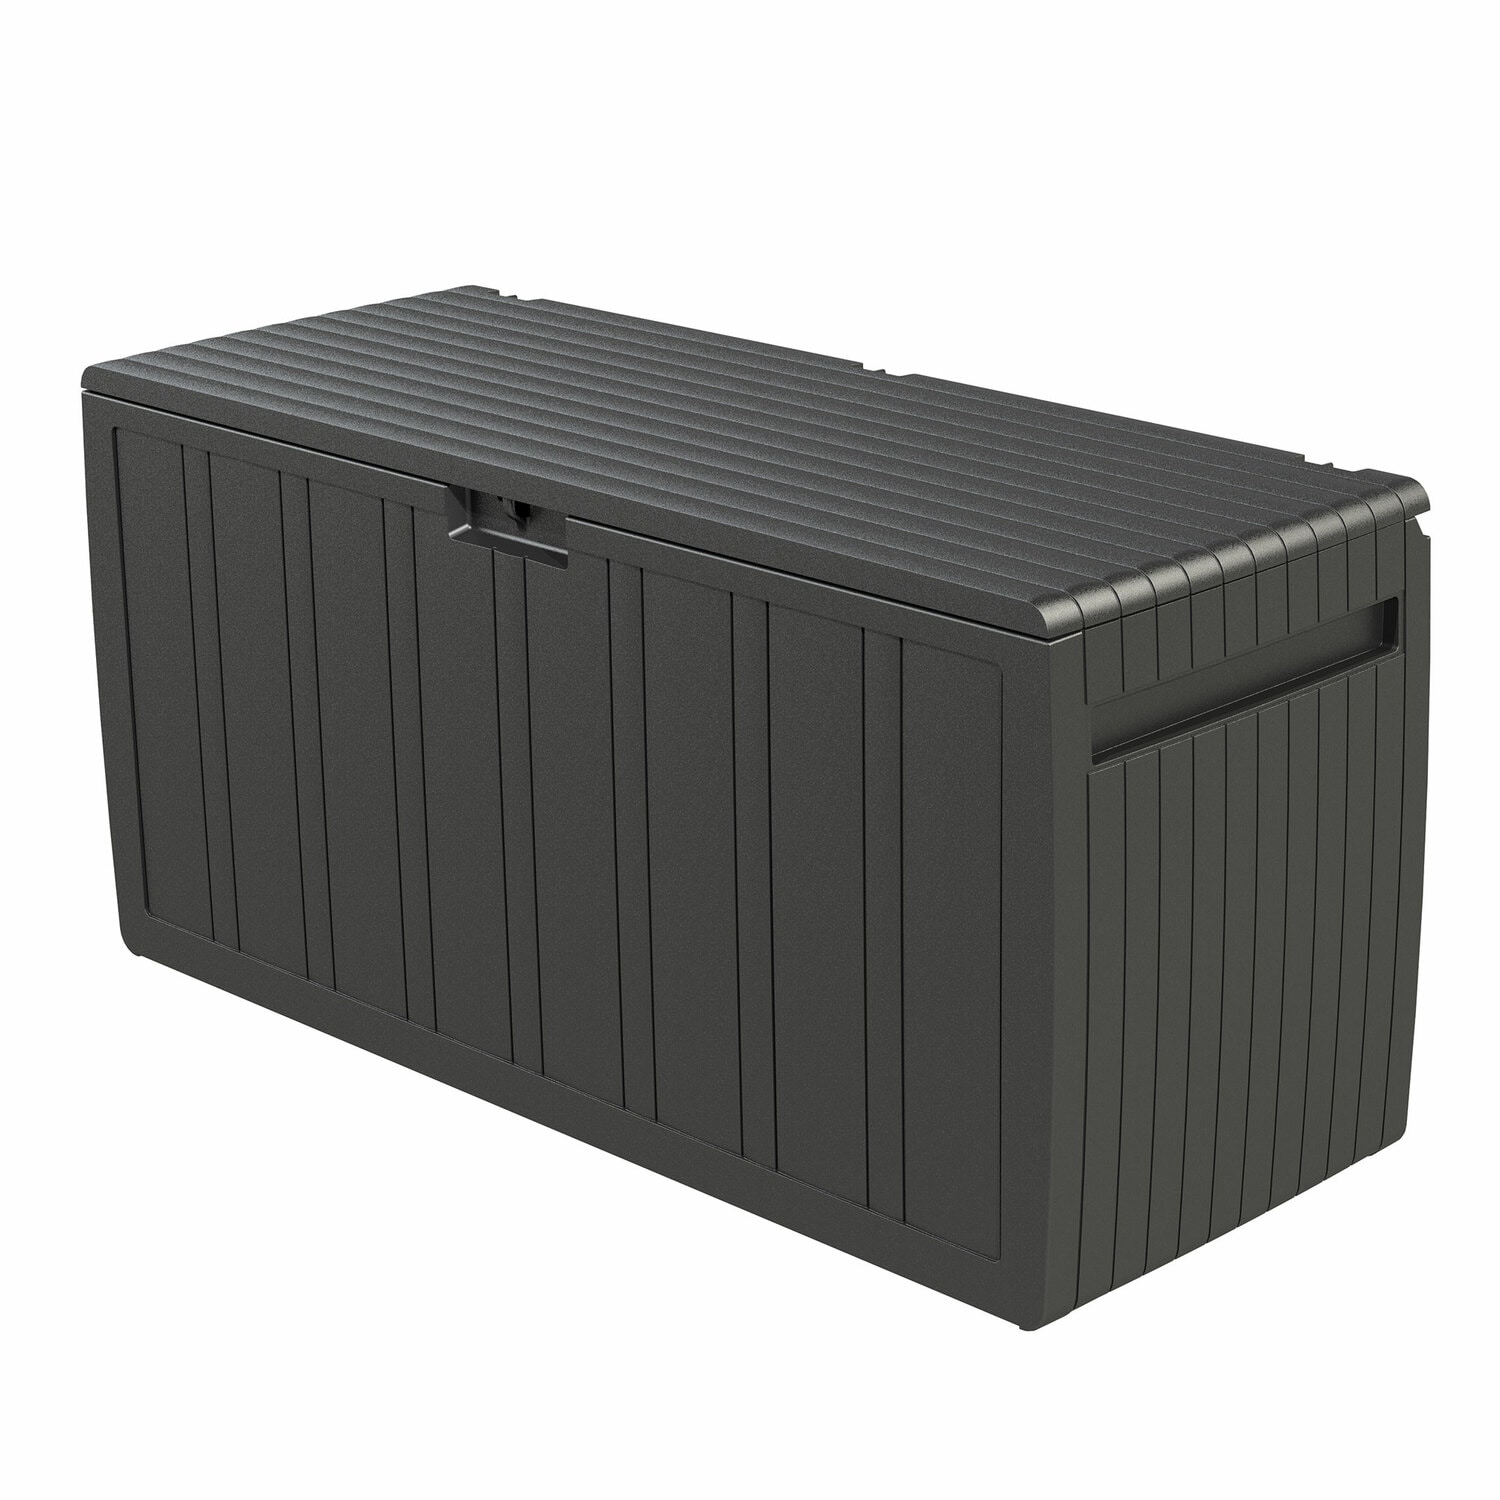 Rubbermaid outdoor garden storage box. 60 inches wide 26 inches deep and 27  inches high.$65 for Sale in North Palm Beach, FL - OfferUp